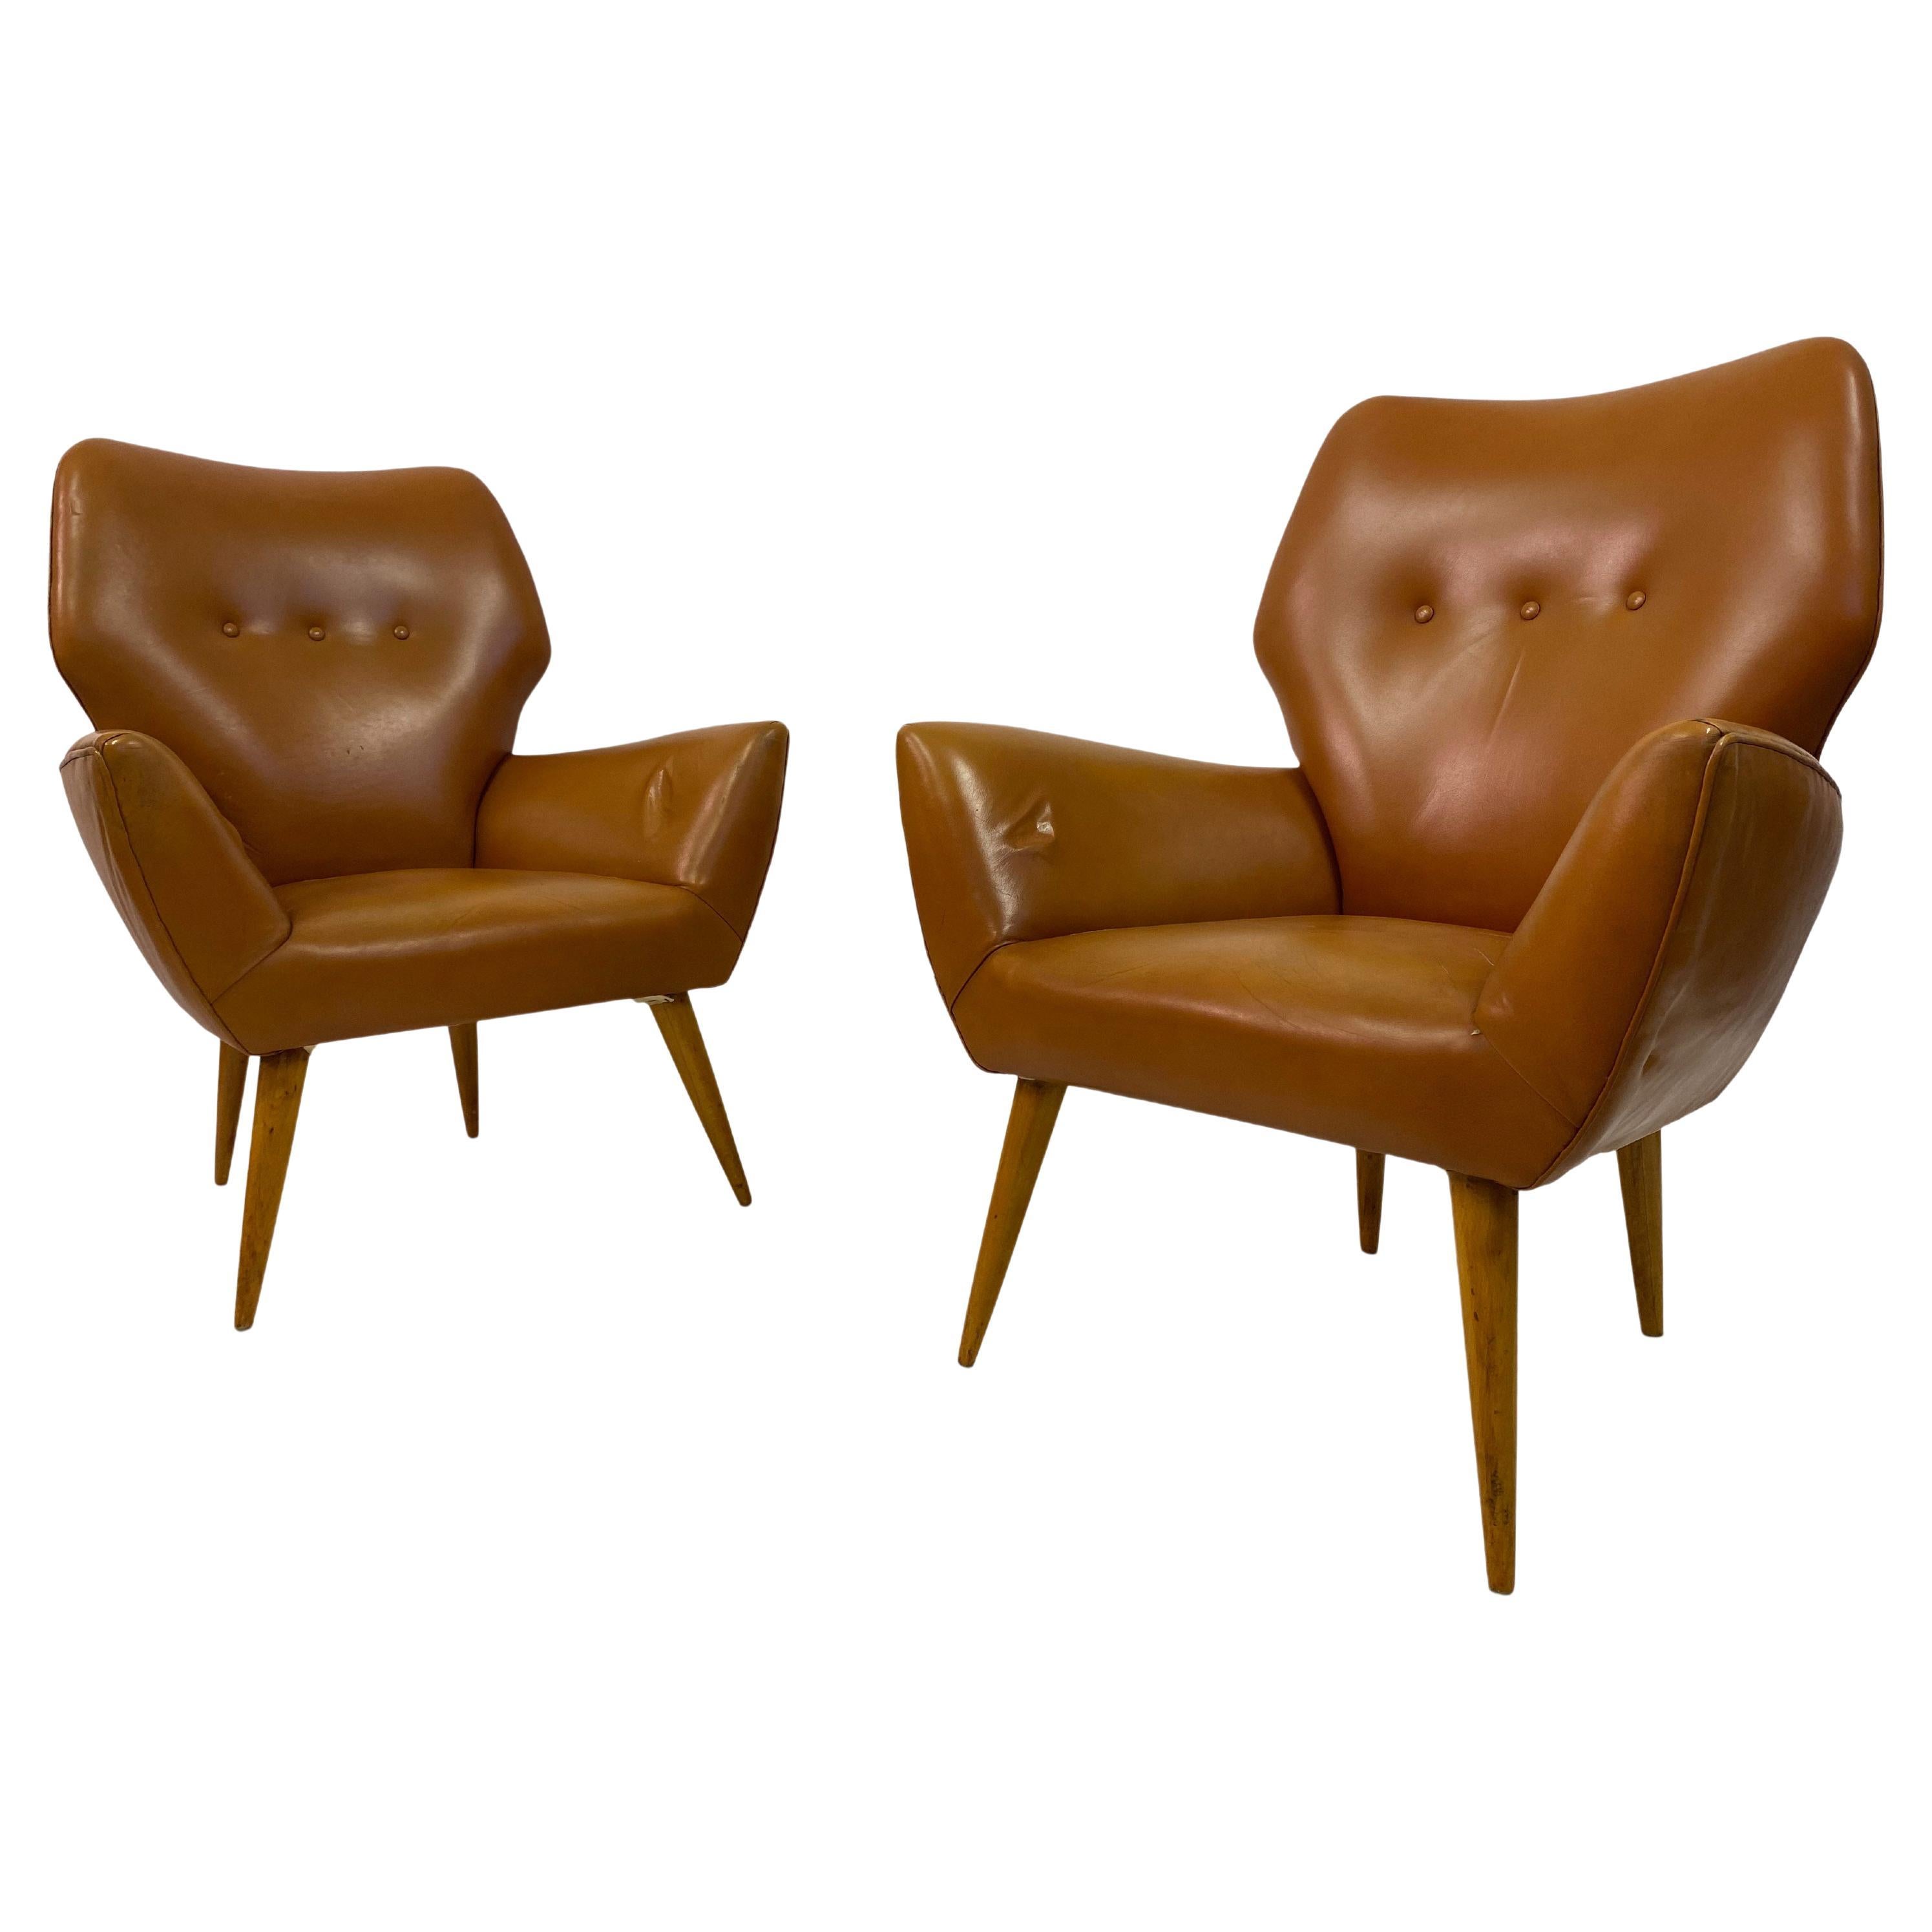 Pair of 1950s Italian Armchairs in Brown Leather For Sale